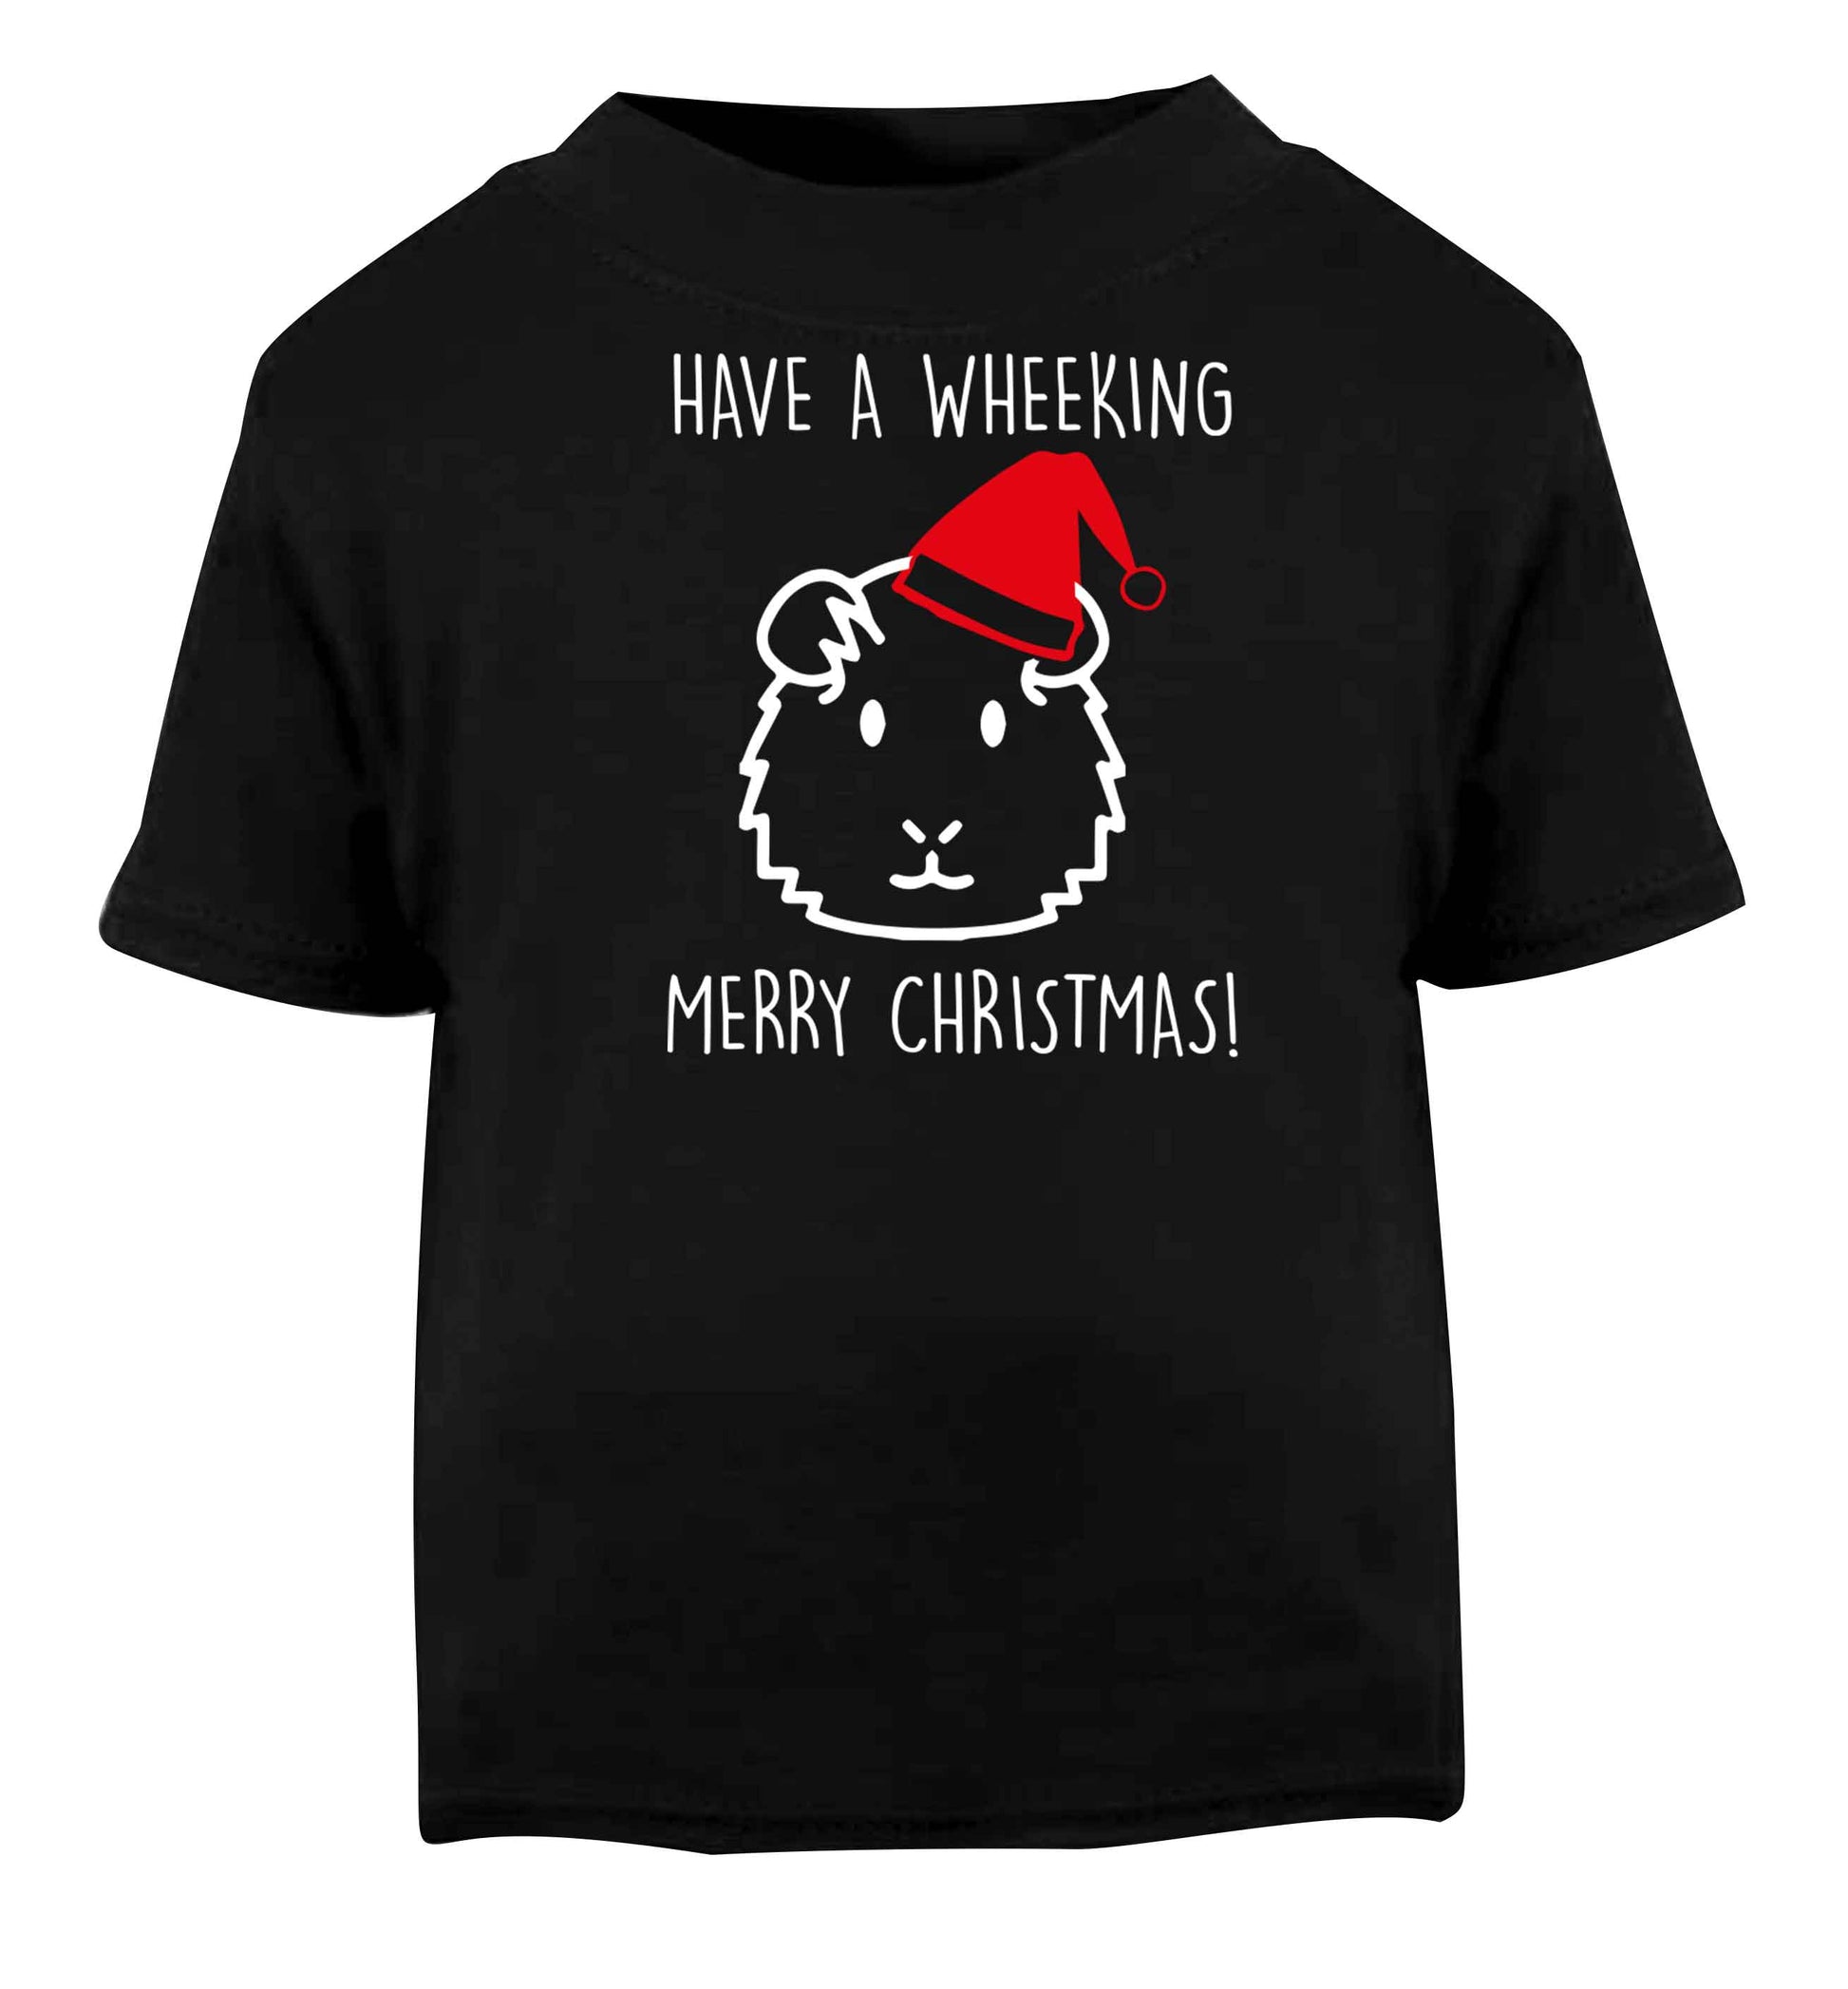 Have a wheeking merry Christmas Black baby toddler Tshirt 2 years